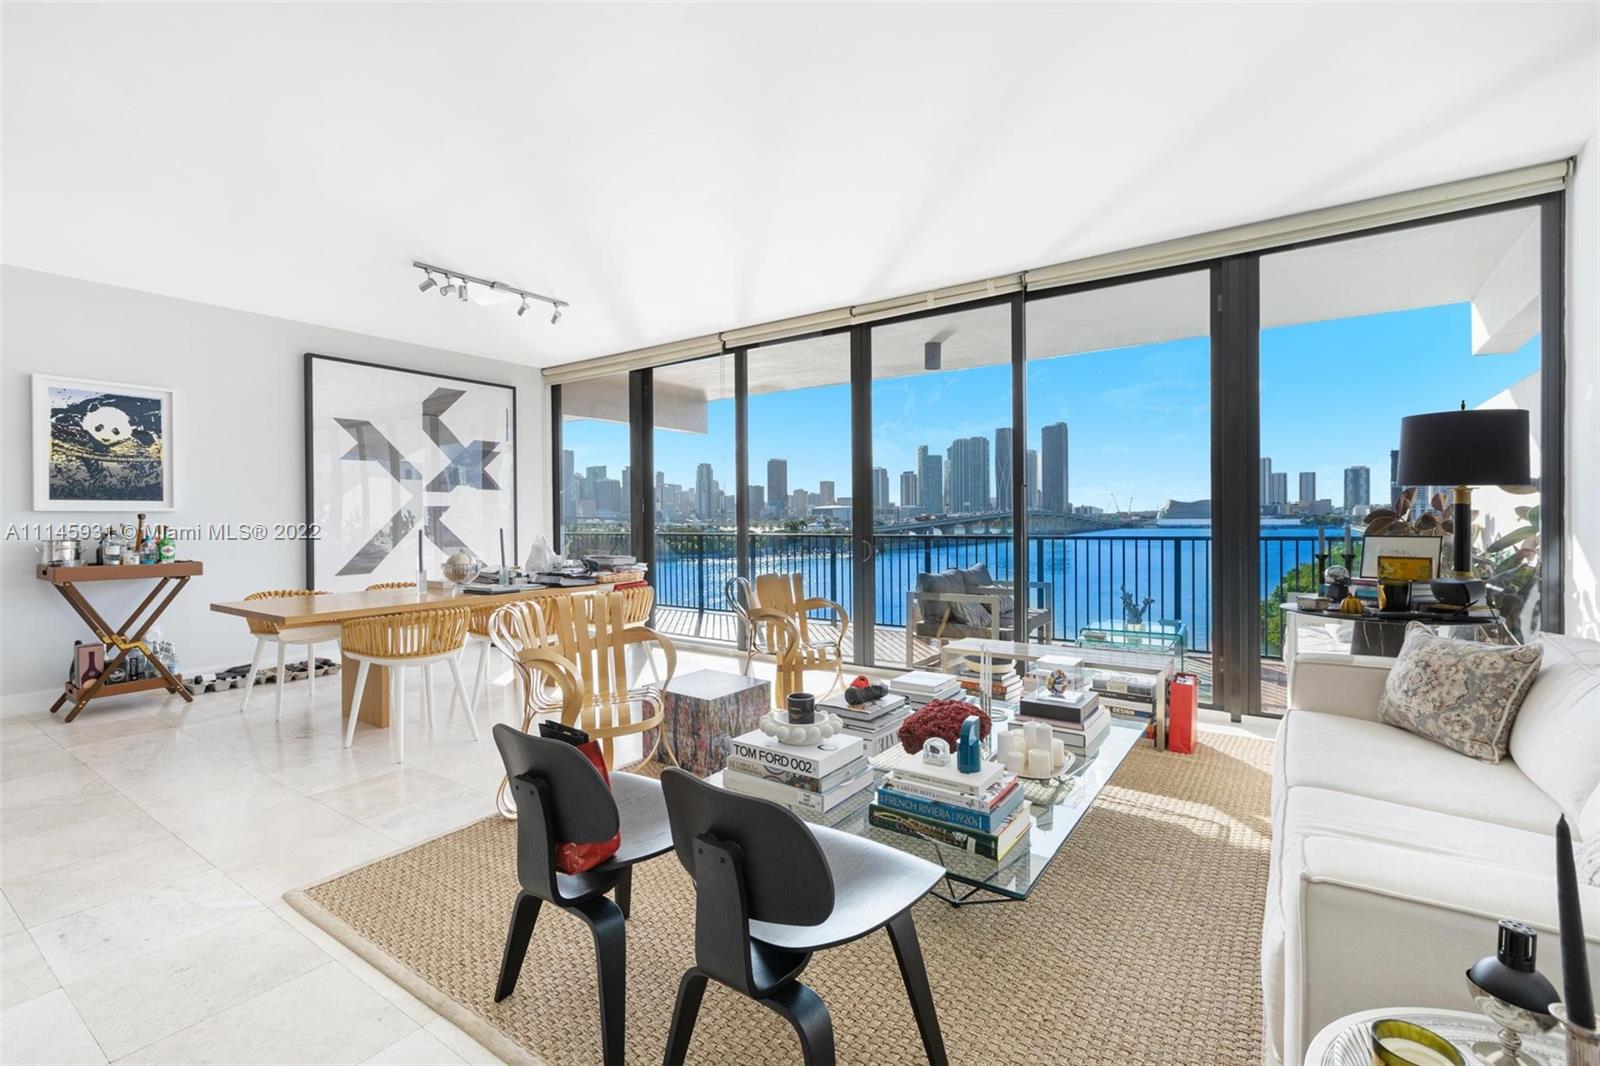 Enjoy stunning direct views of the Bay and Downtown from this beautiful and spacious 2/2 at 1000 Venetian condo. Sitting on the water between Miami Beach and the Downtown, this elegant condo boasts high ceilings, floor to ceiling impact windows, marble flooring and a fabulous oversized terrace overlooking the bay. Building amenities include two pools, jacuzzi, fitness center & spa, 2 tennis courts, basketball court, children's play area, gated entry, doorman, security. 1 assigned covered parking space. Annual Lease only. Available March 1st 2022